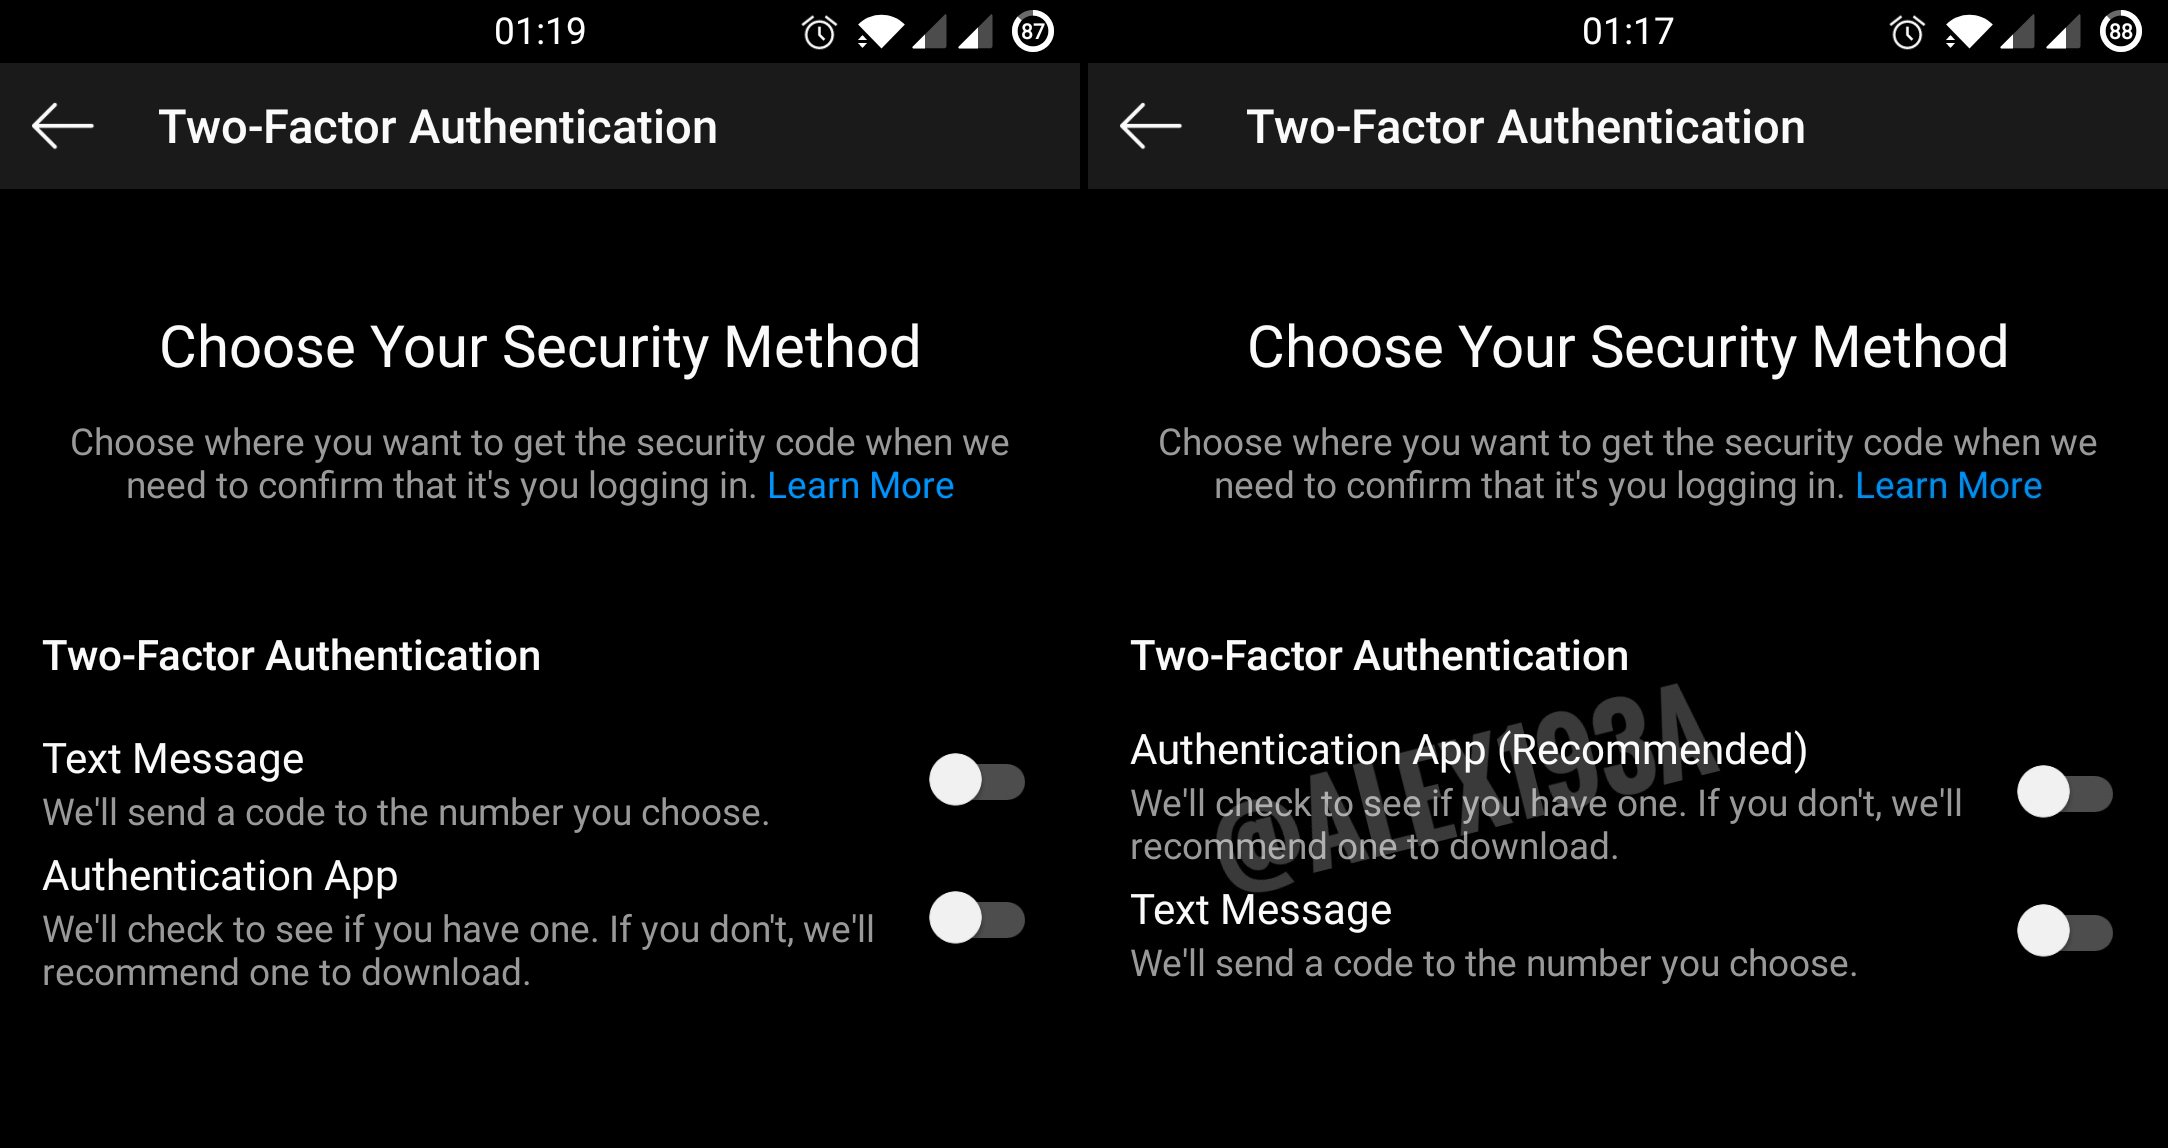 #Instagram will recommend you to use an Authentication App ...